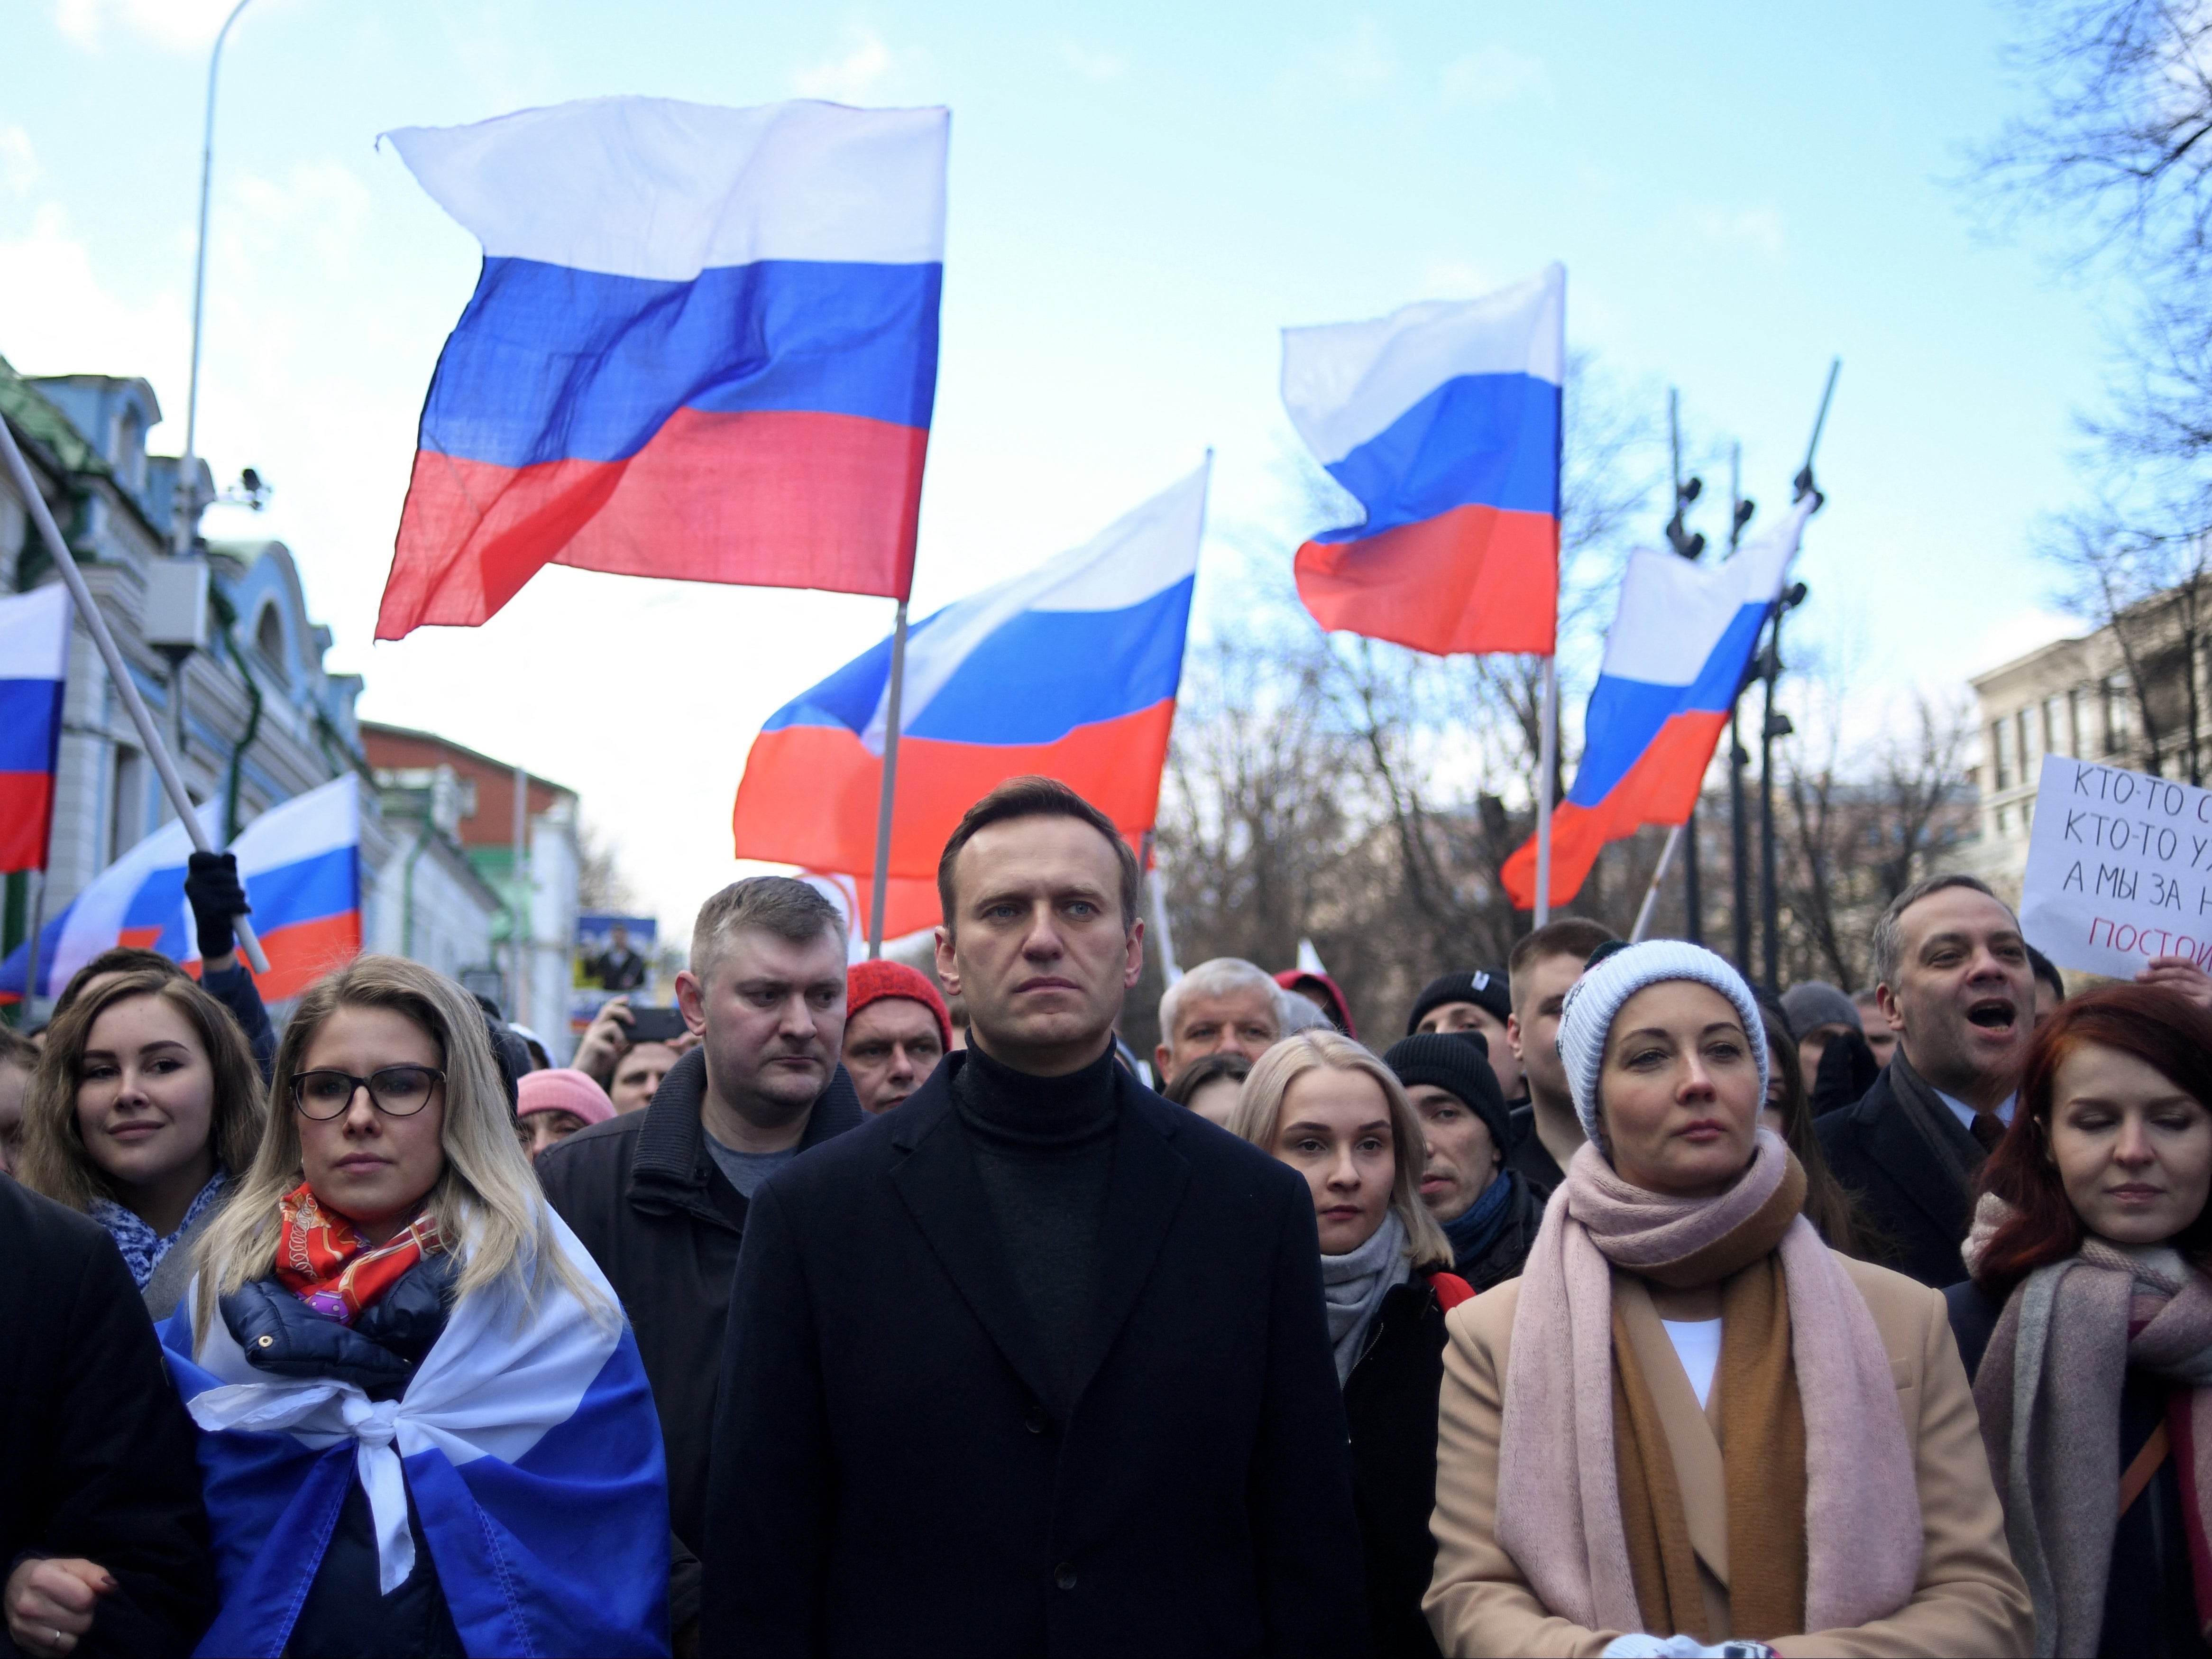 Russian opposition leader Navalny was critical of Putin and so became the victim of repeated aggression from the state